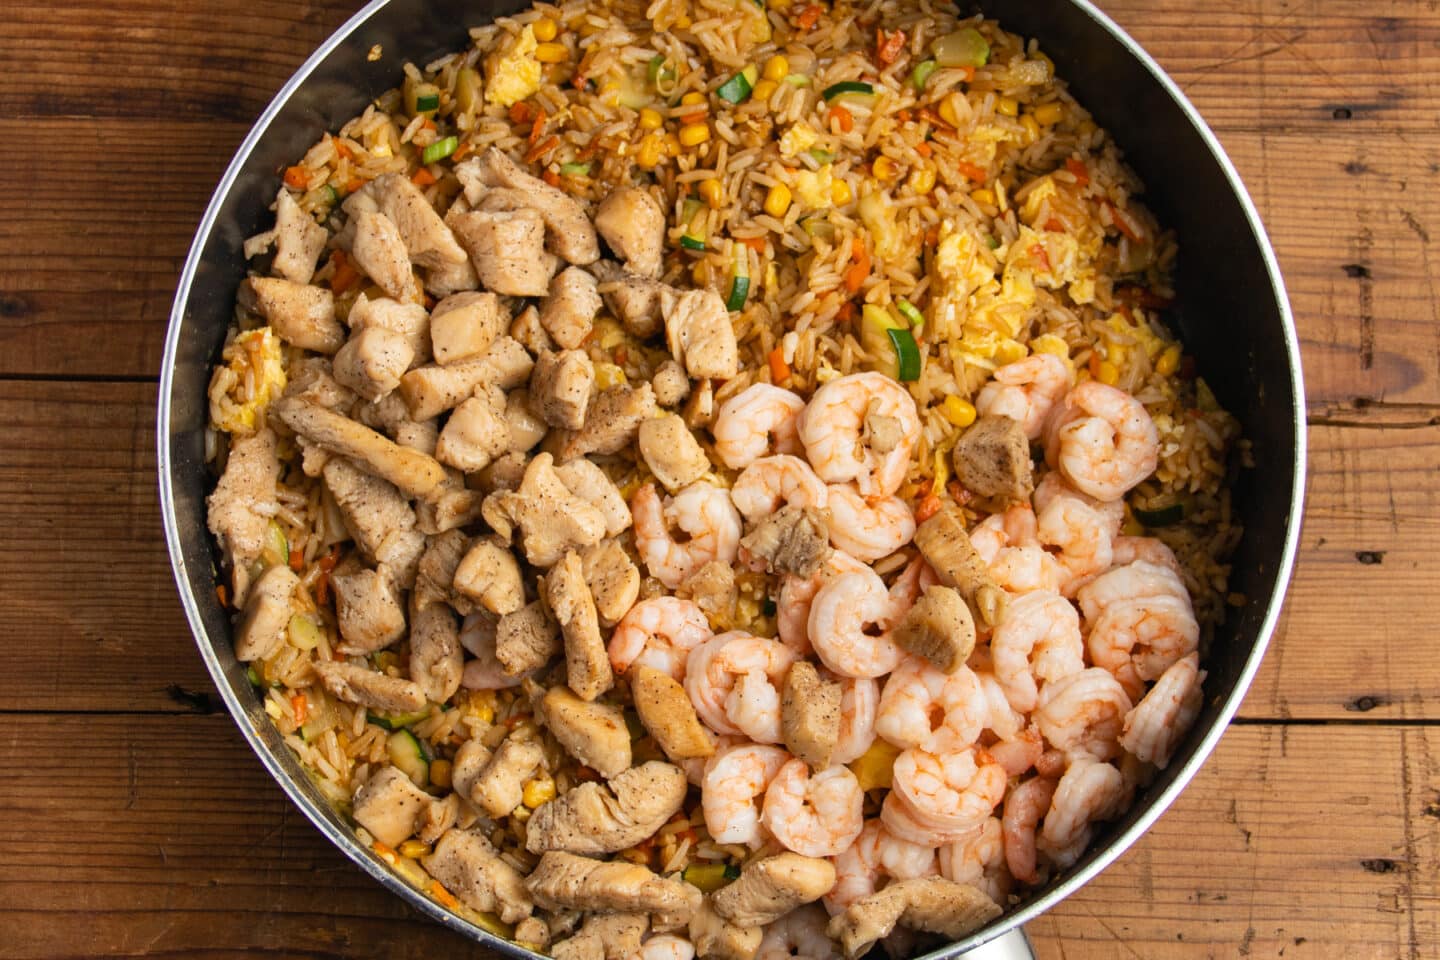 This is a picture of the fried rice in the skillet with shrimp and chicken added back in.